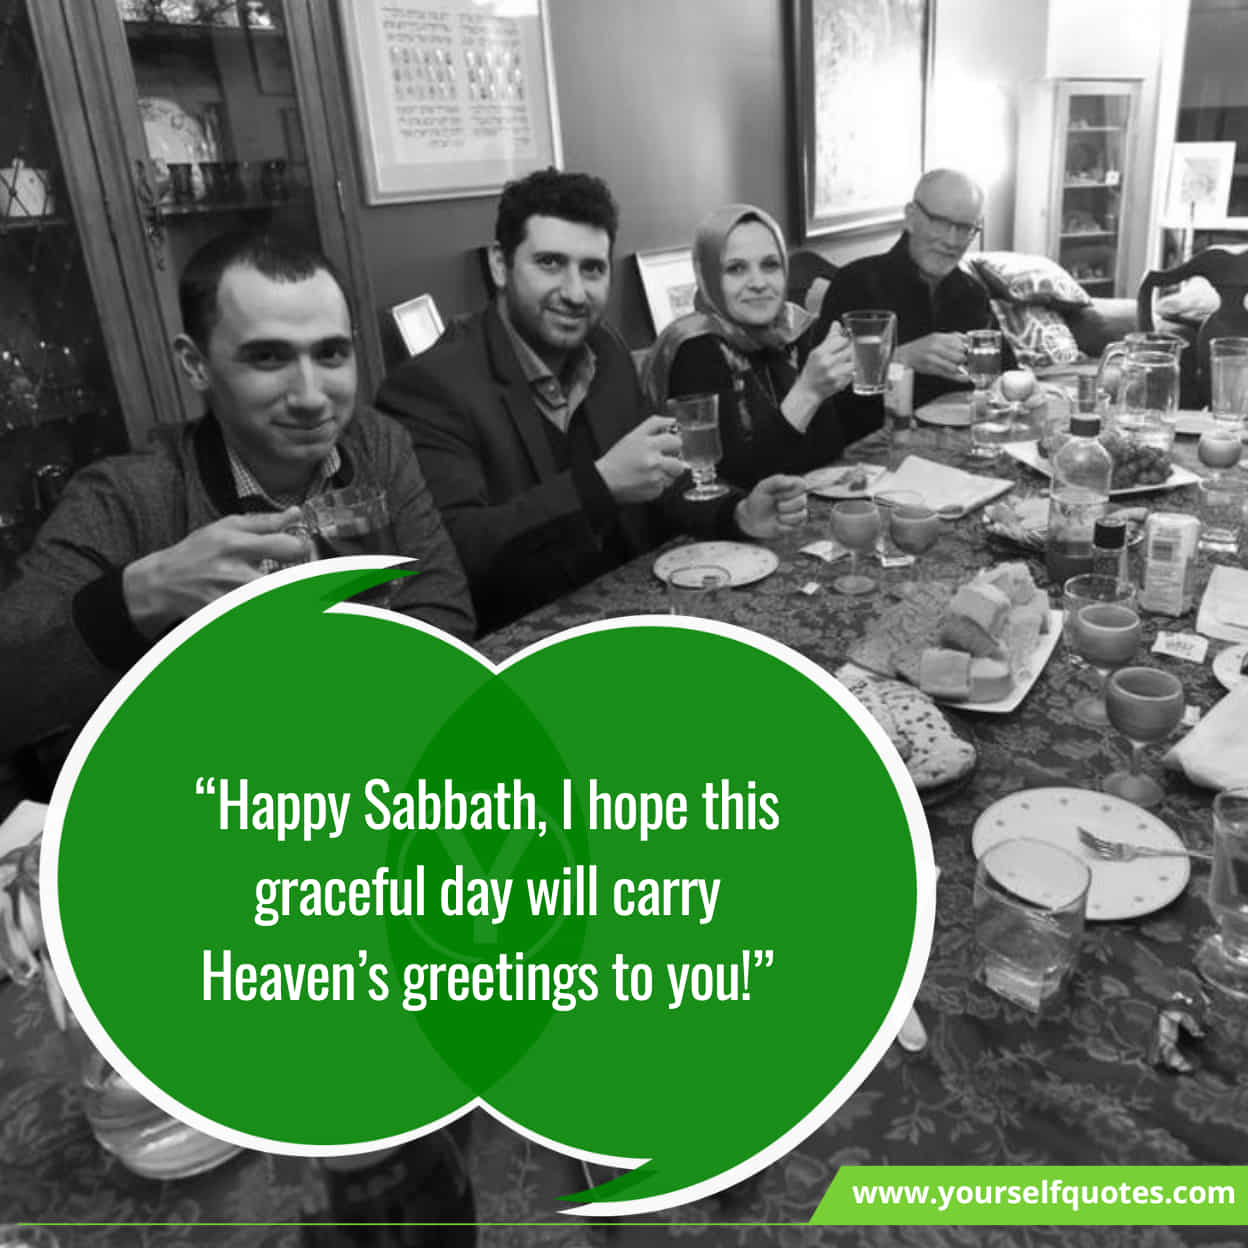 Happy Sabbath Wishes, Messages & Greetings